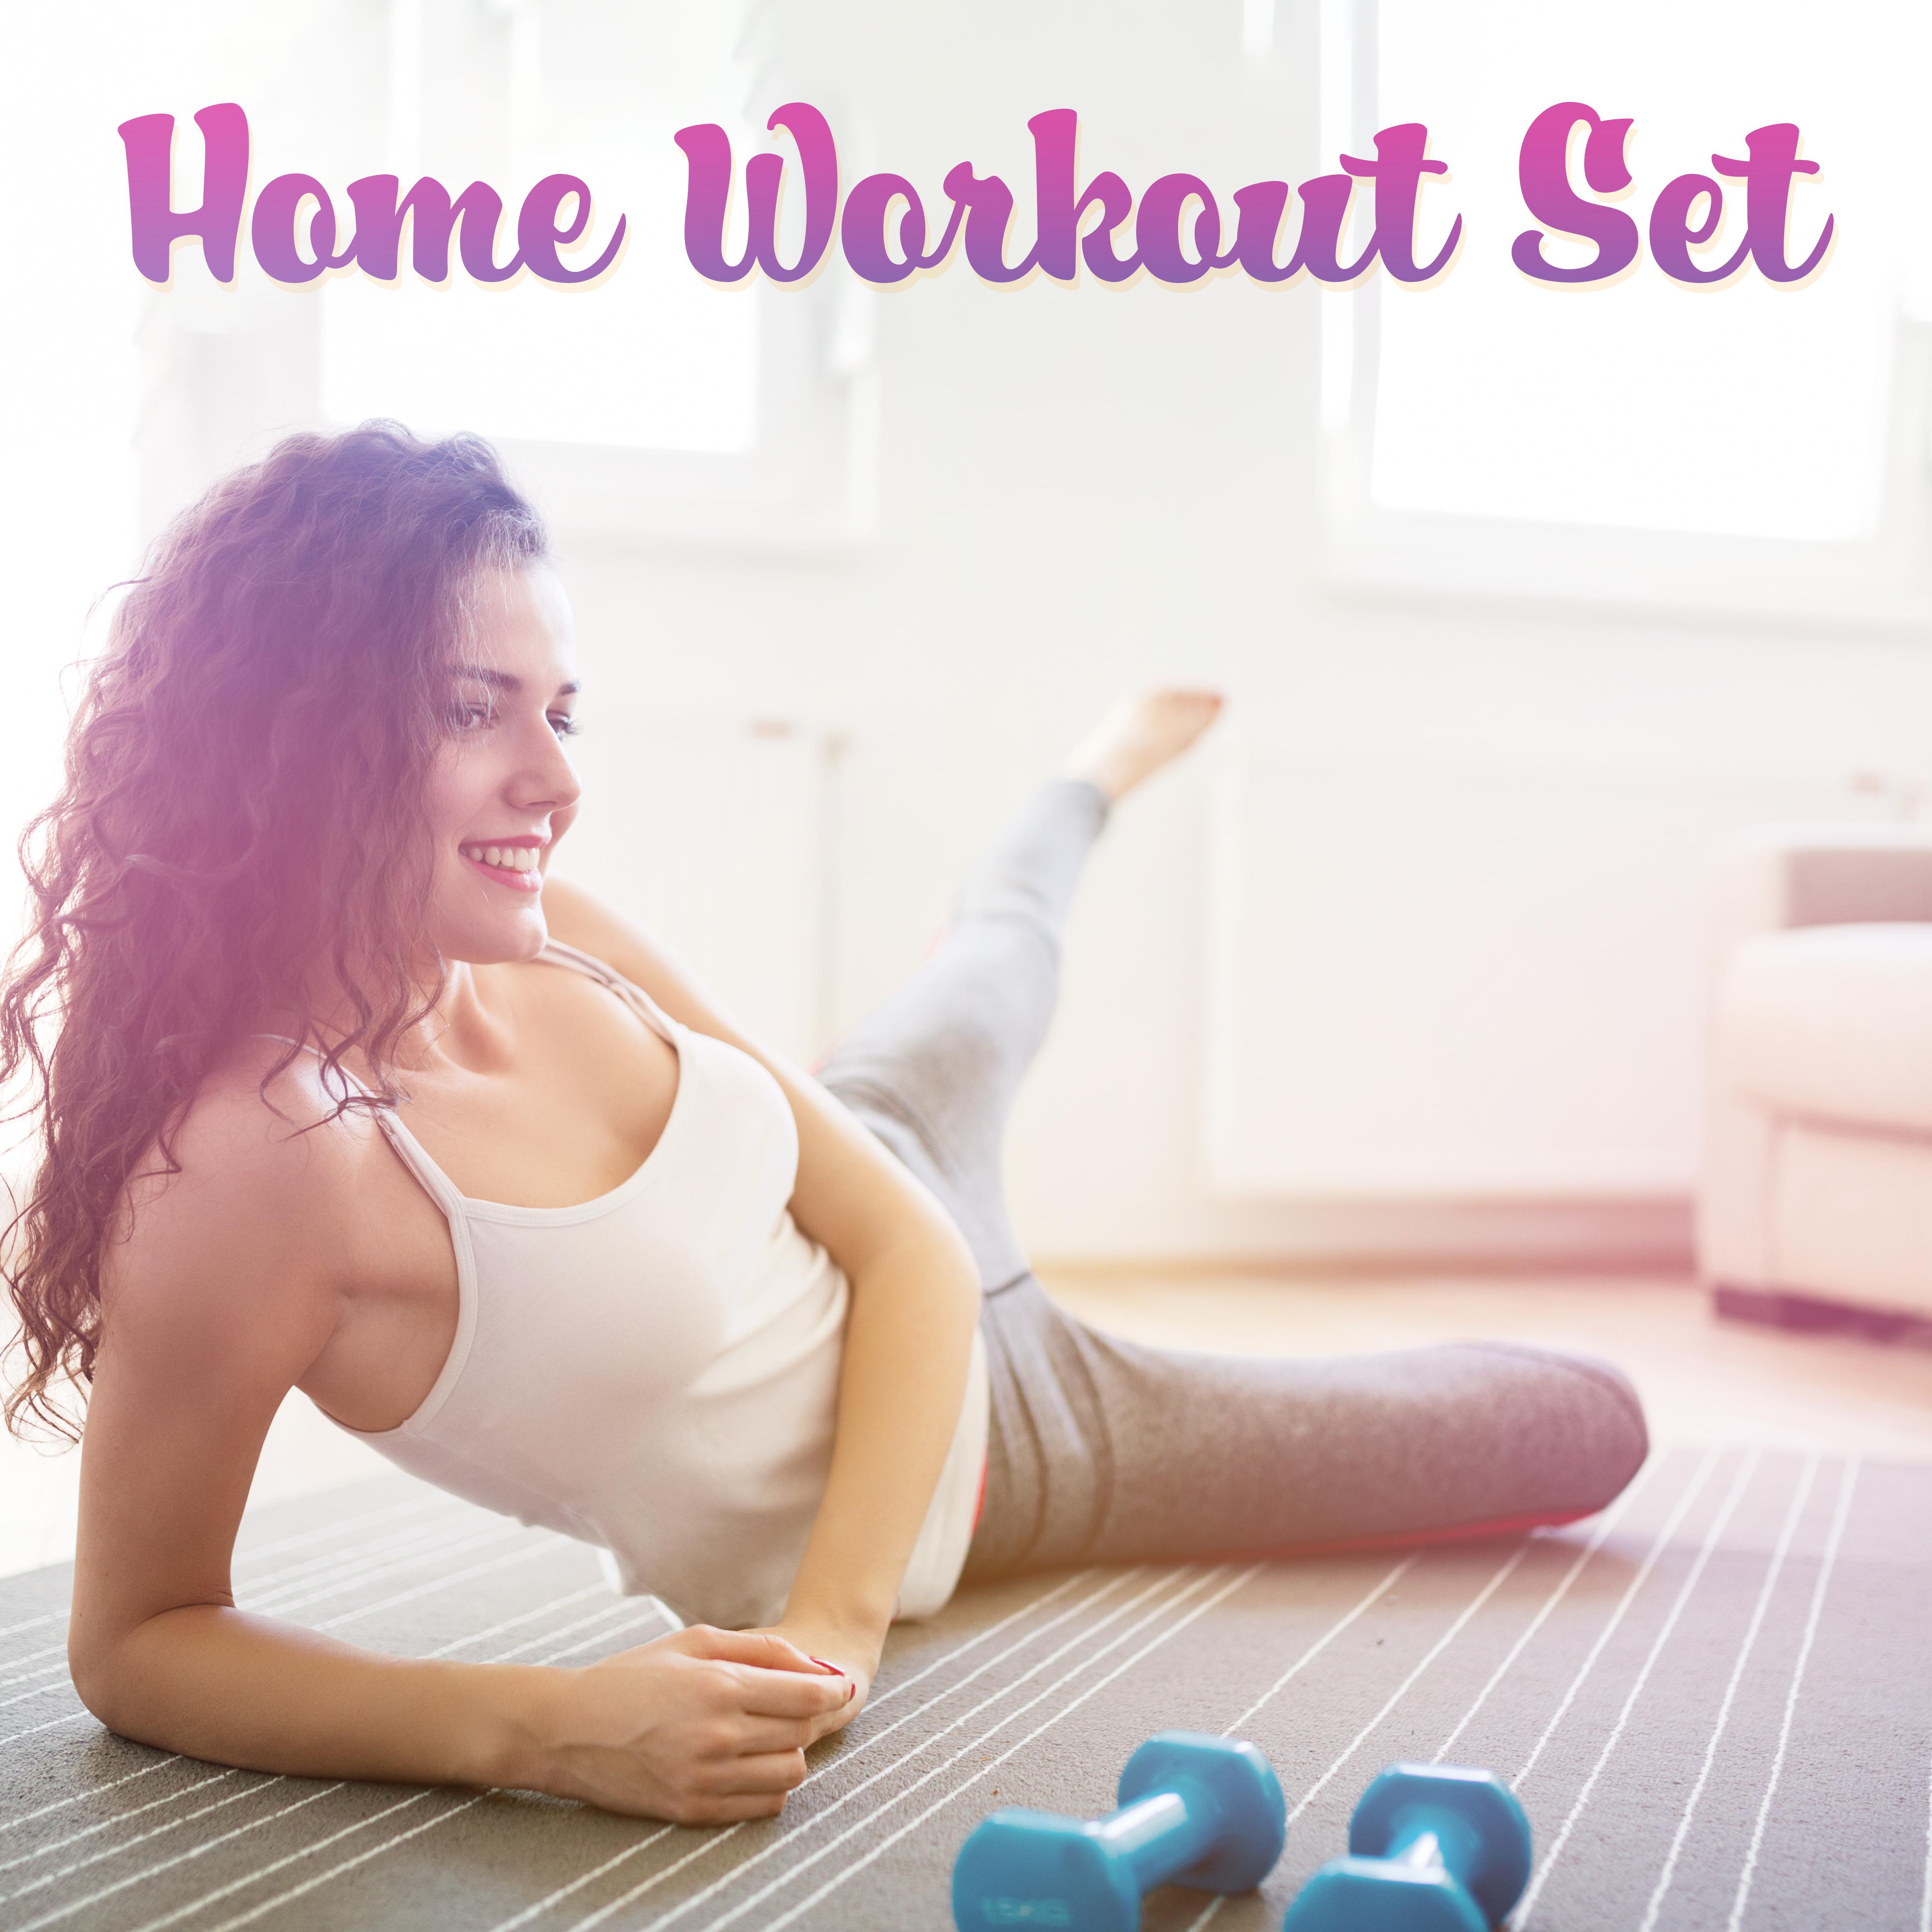 Home Workout Set: 15 Tracks for Fitness and Physical Exercises